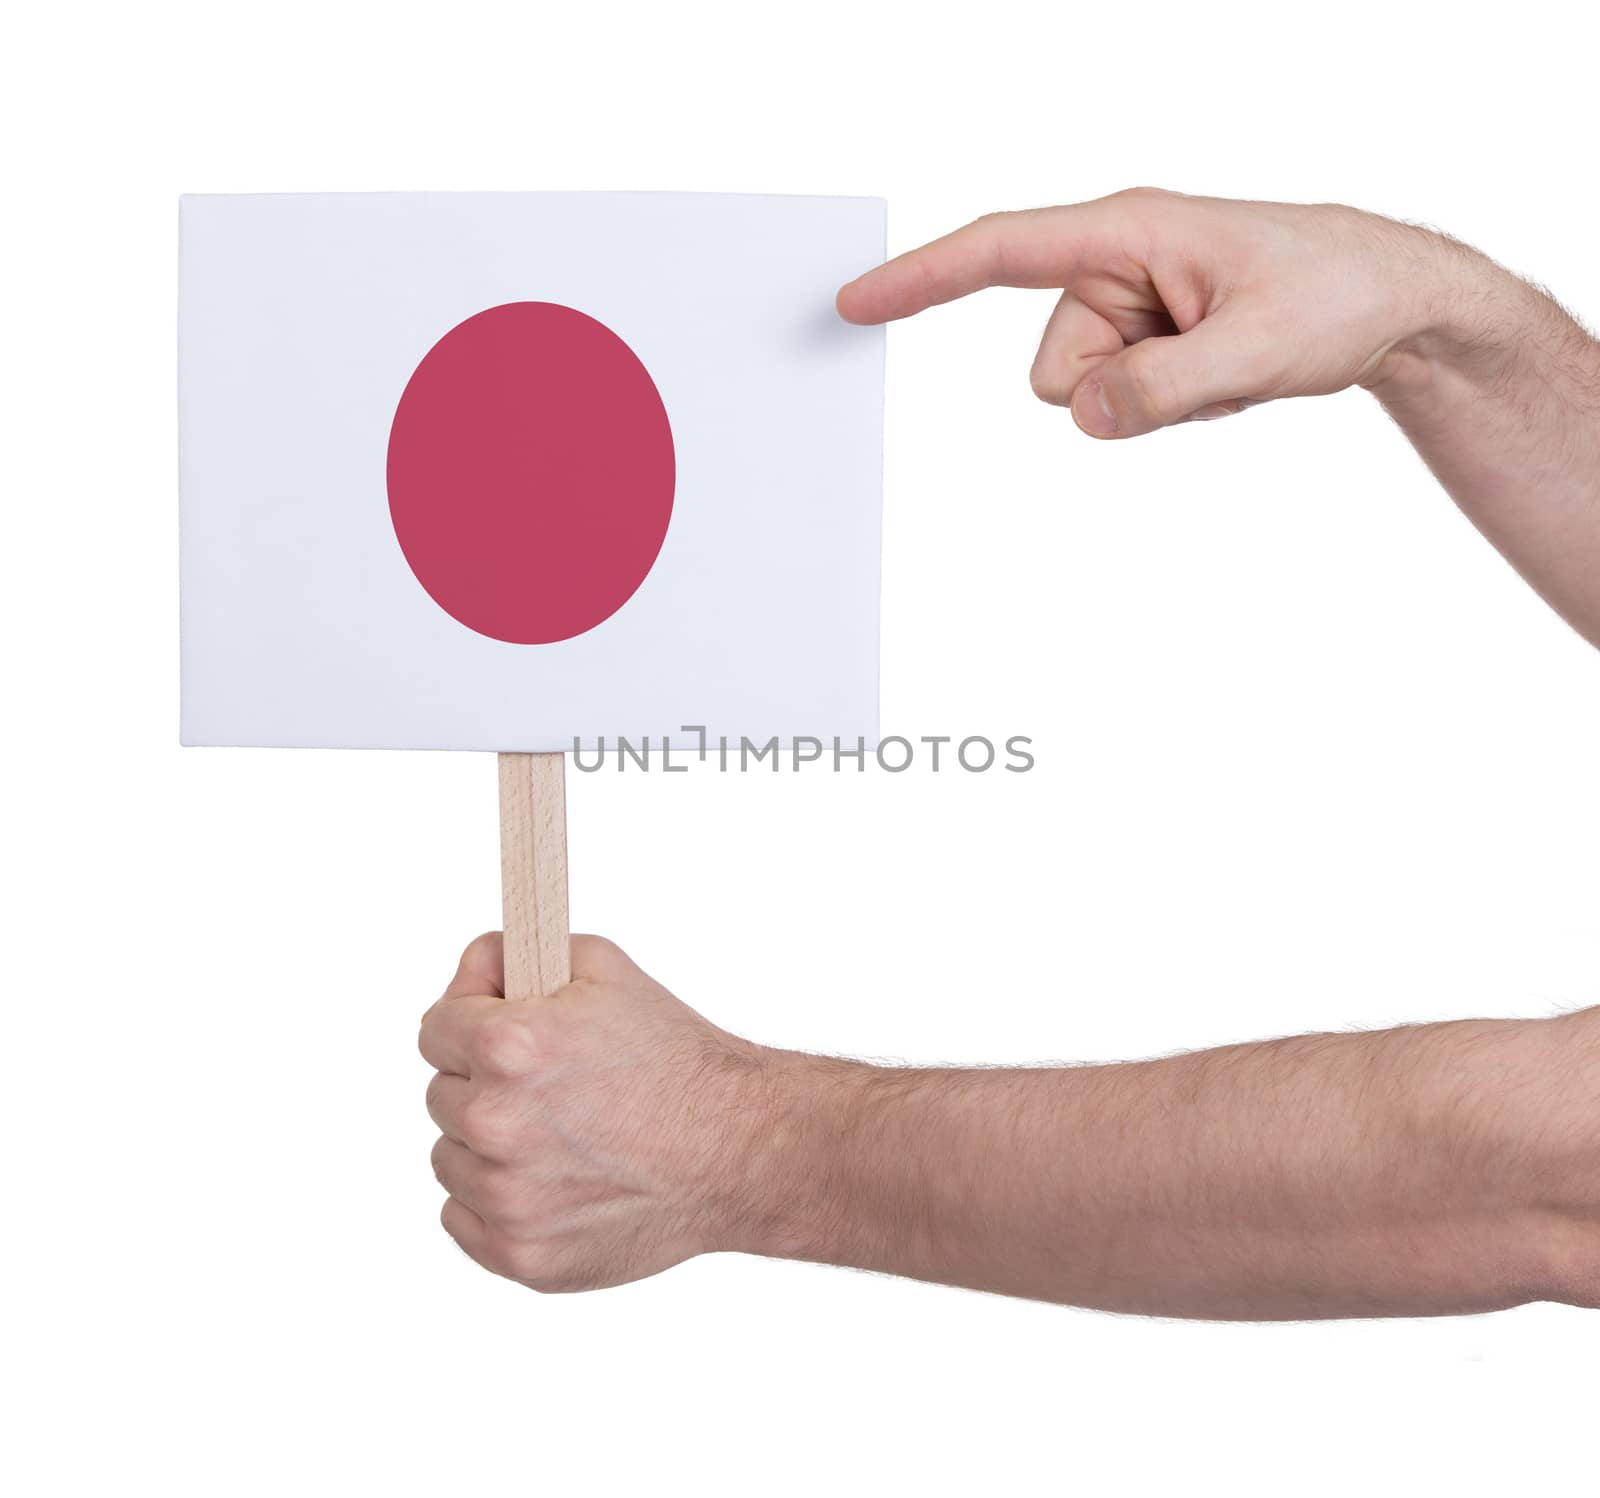 Hand holding small card, isolated on white - Flag of Japan